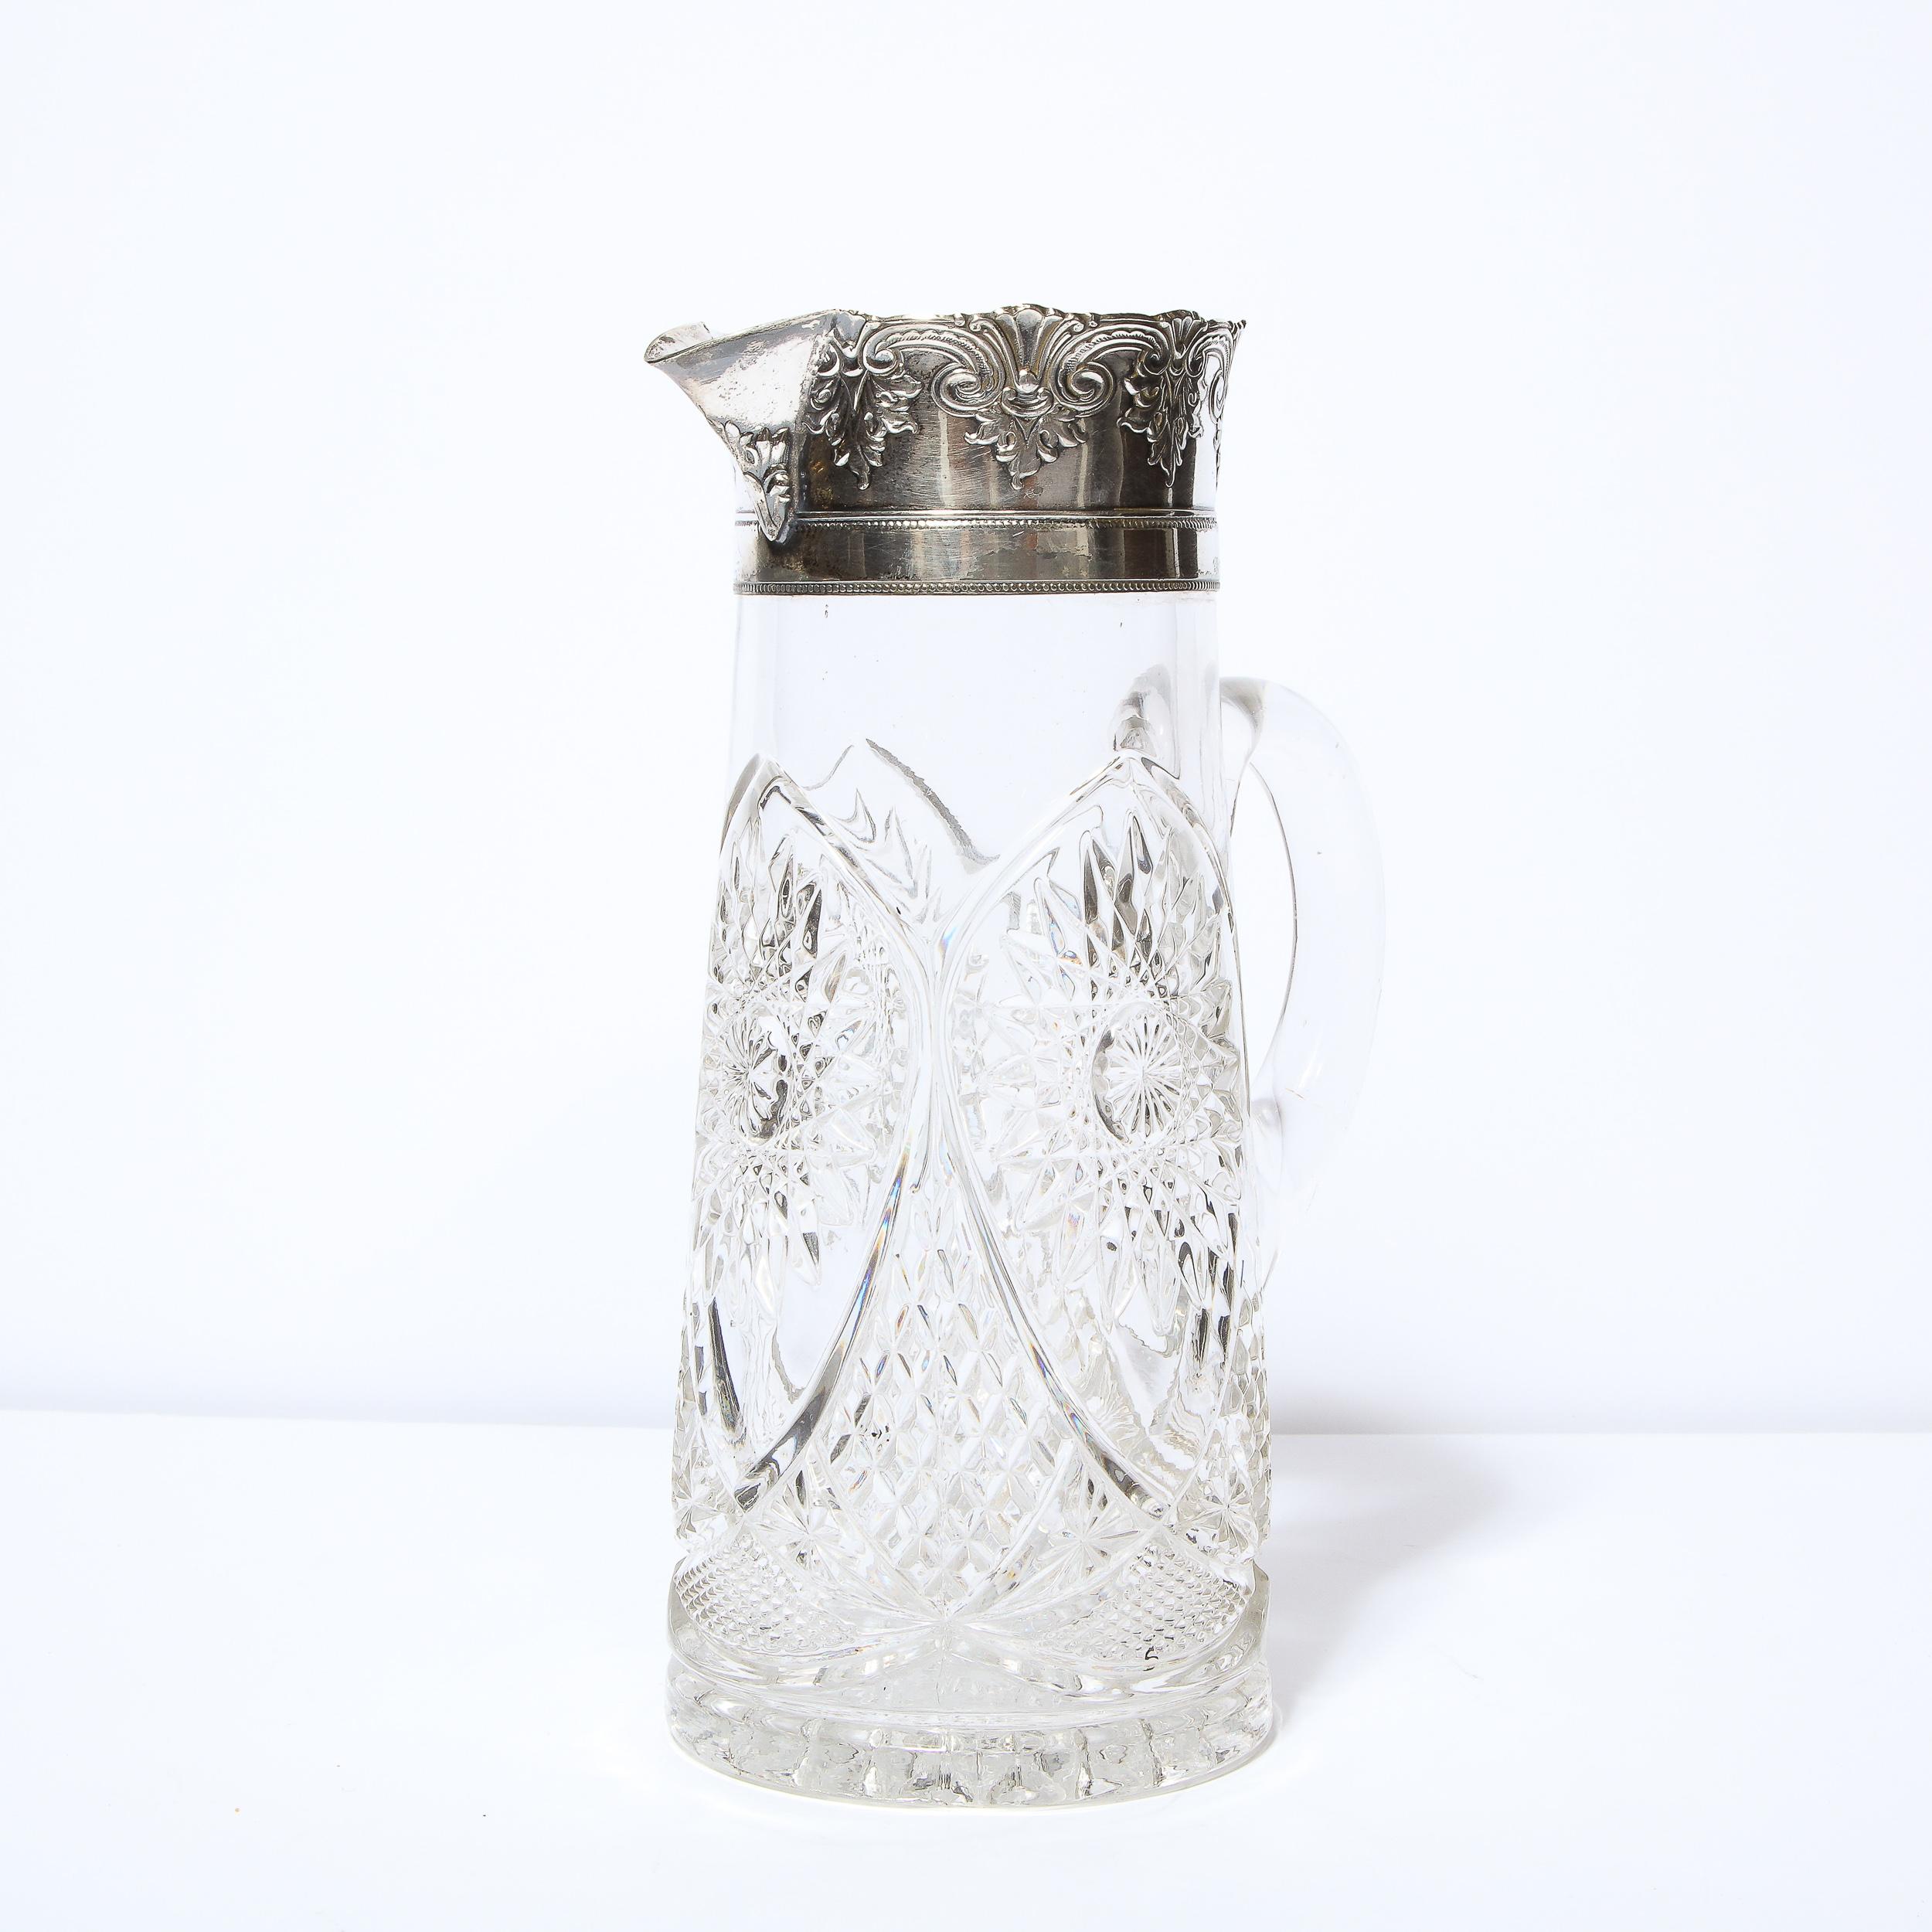 1940s Art Deco Pressed Glass Pitcher with Geometric Details & Silver Plated Top 2